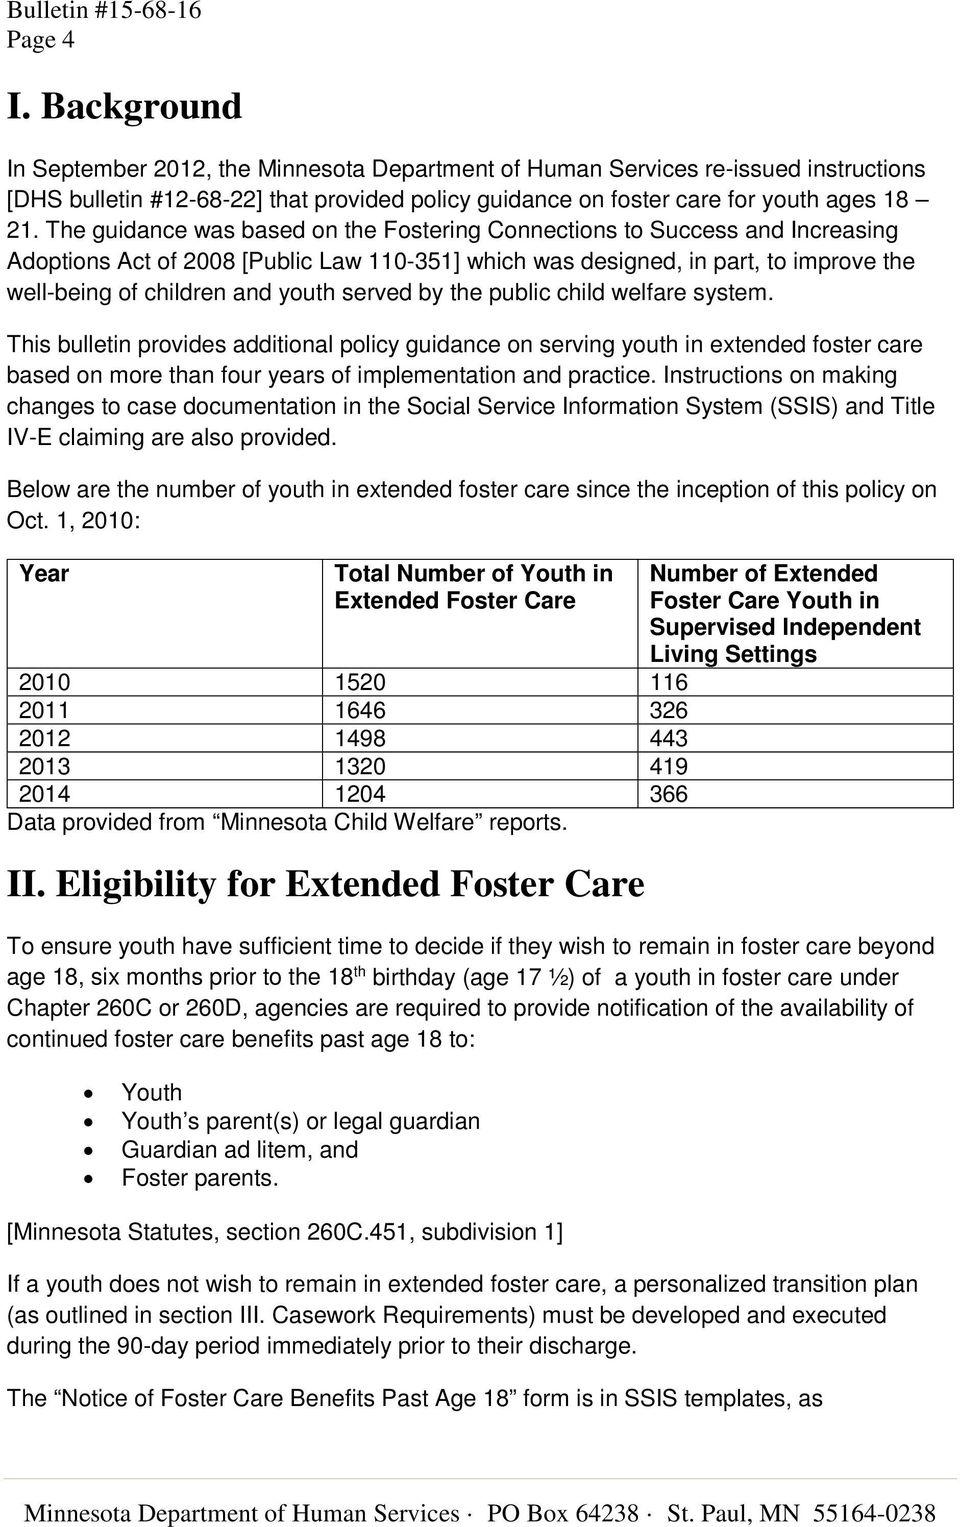 served by the public child welfare system. This bulletin provides additional policy guidance on serving youth in extended foster care based on more than four years of implementation and practice.